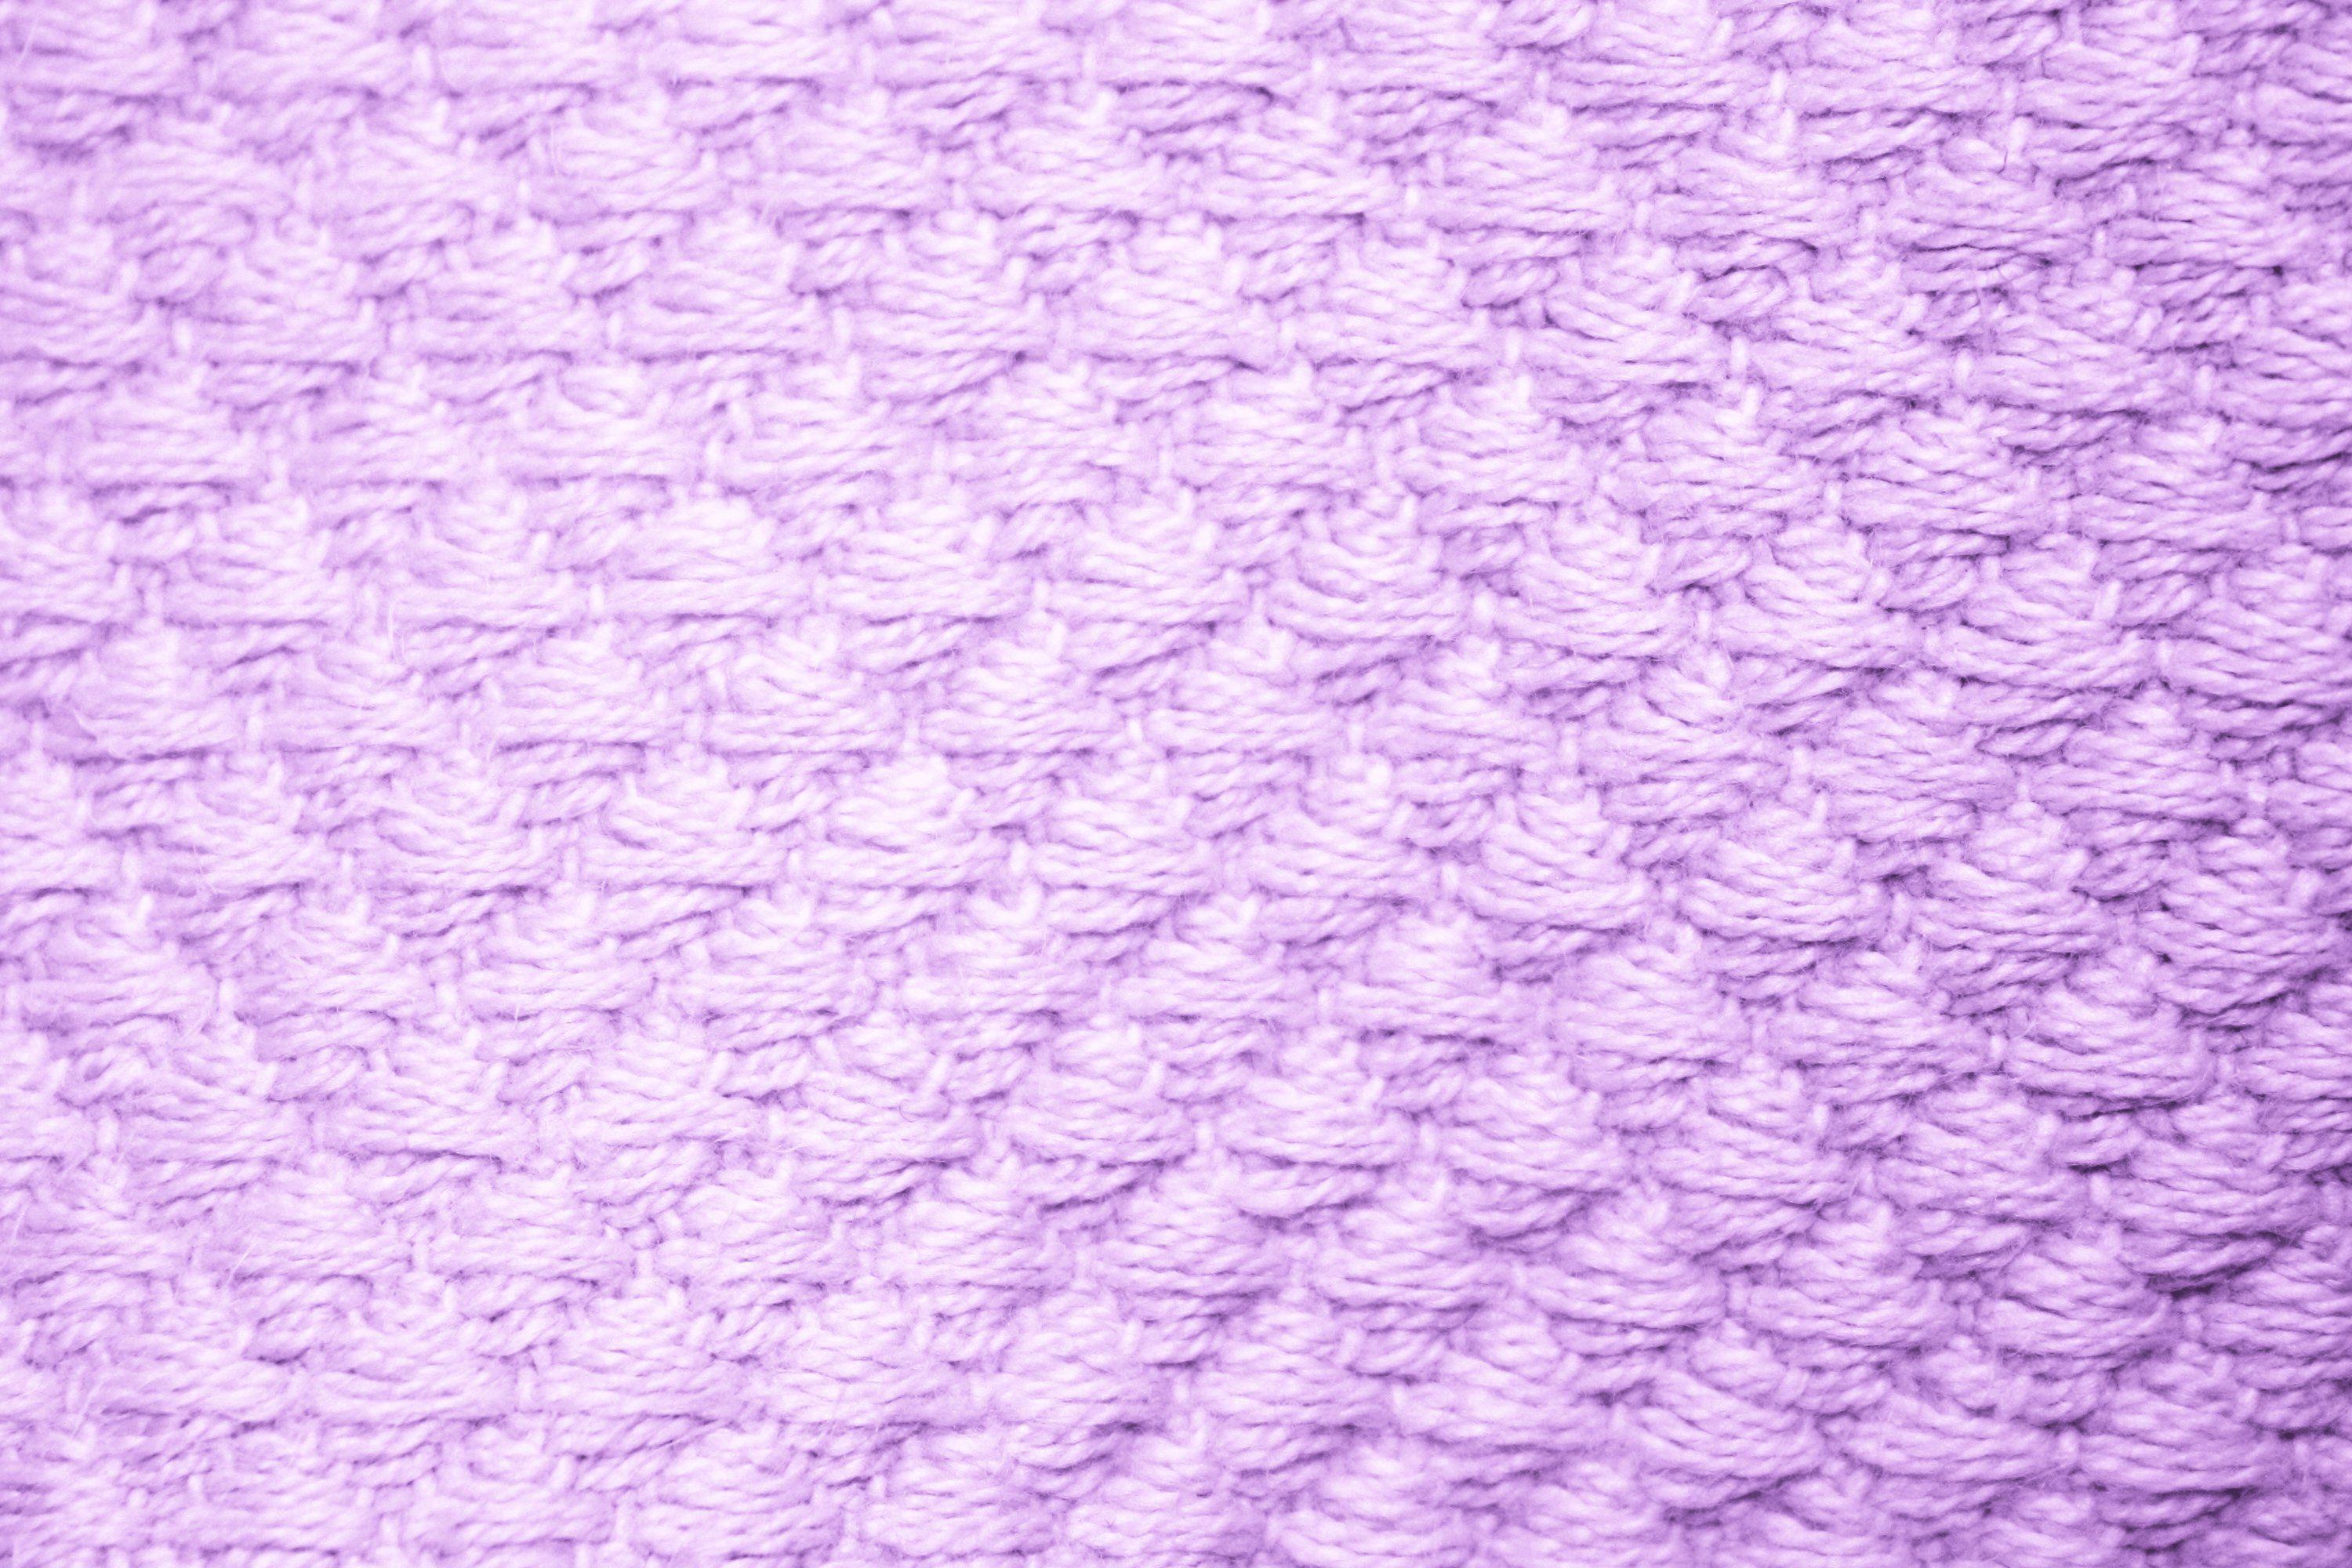 Lavender Diamond Patterned Blanket Close Up Texture Picture. Free